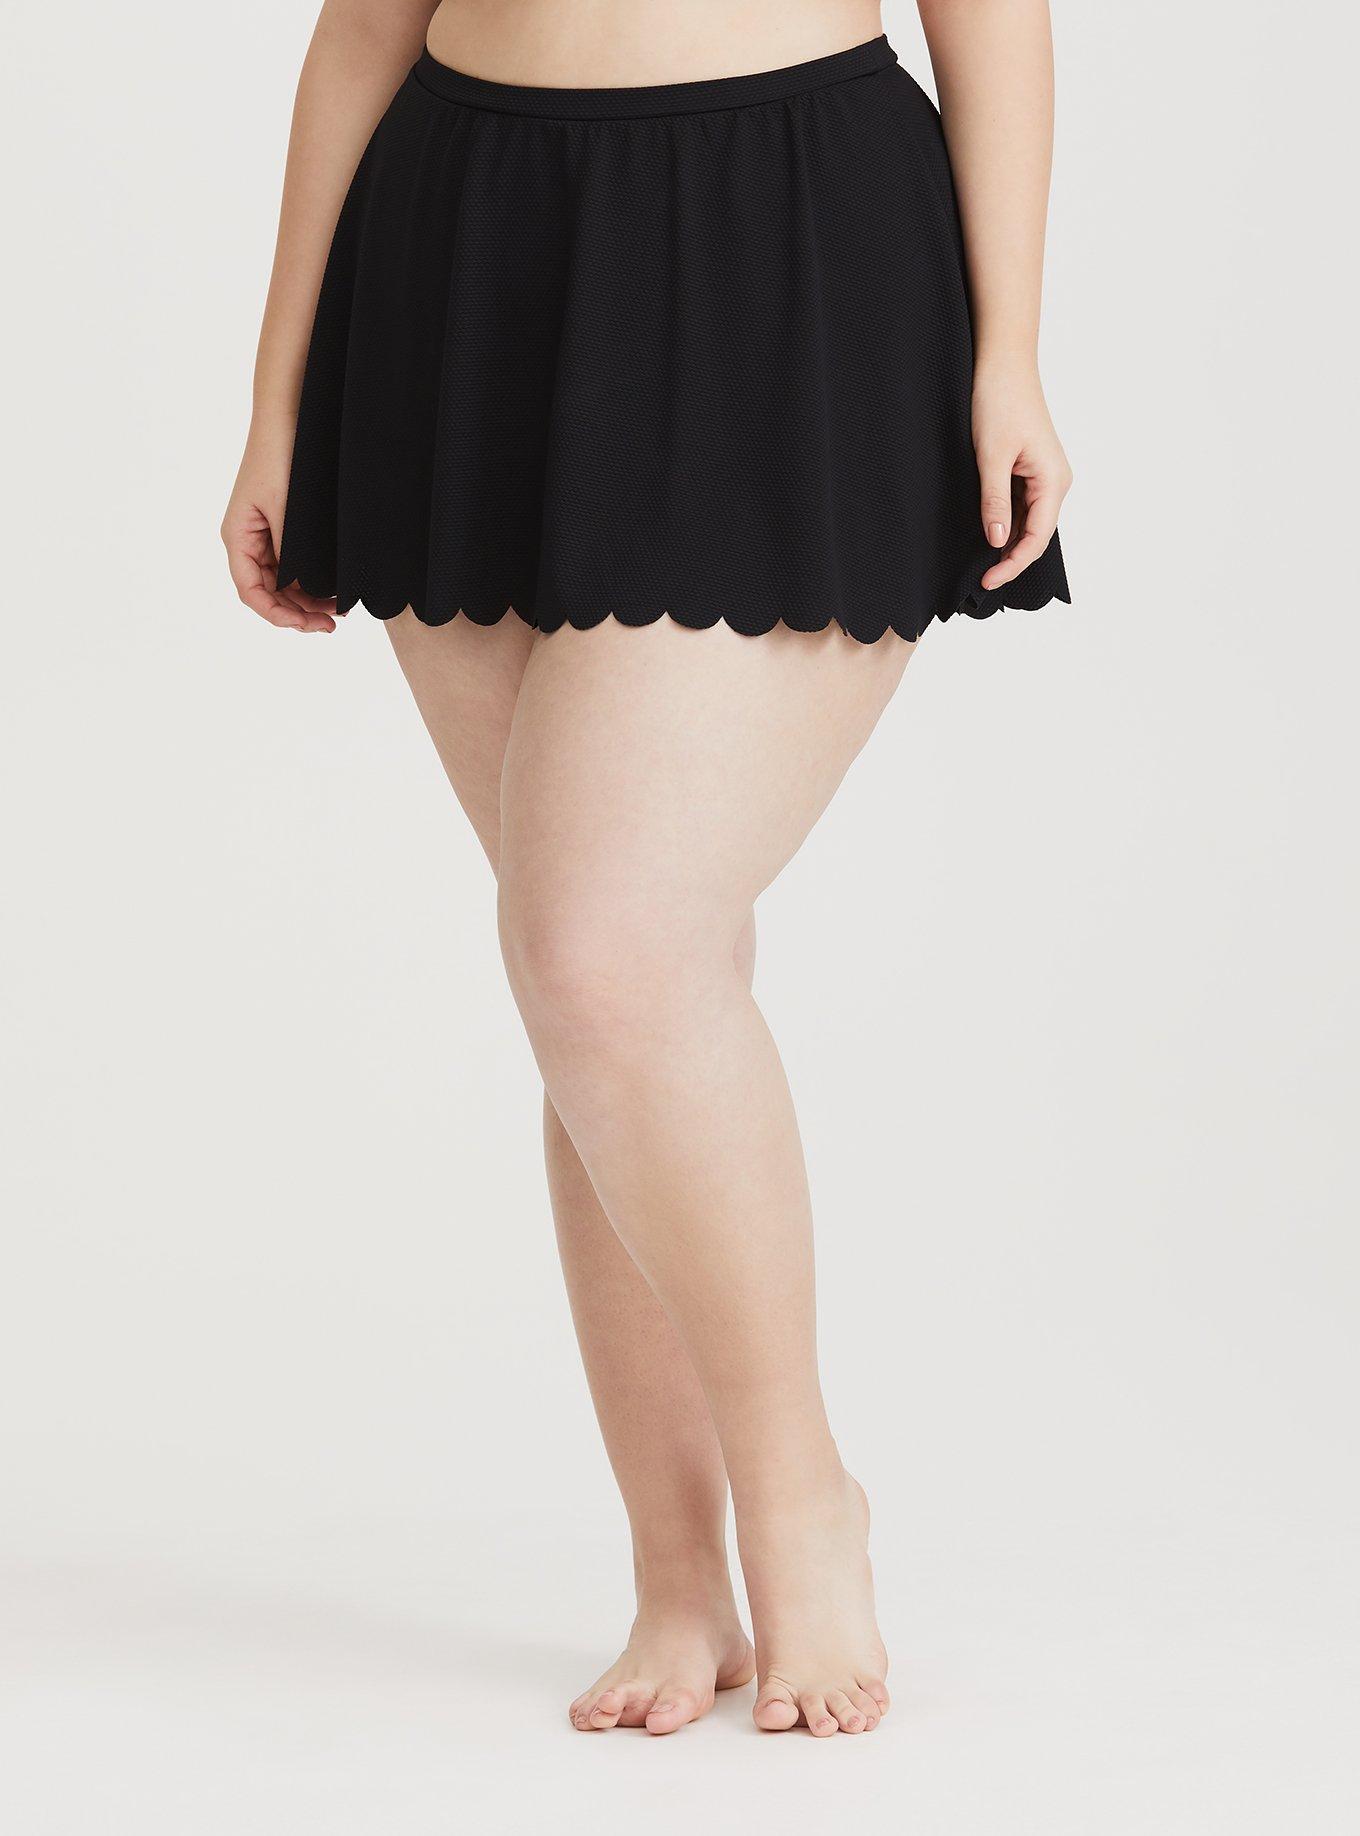 Magical Feeling Mesh Skirt Curves • Impressions Online Boutique